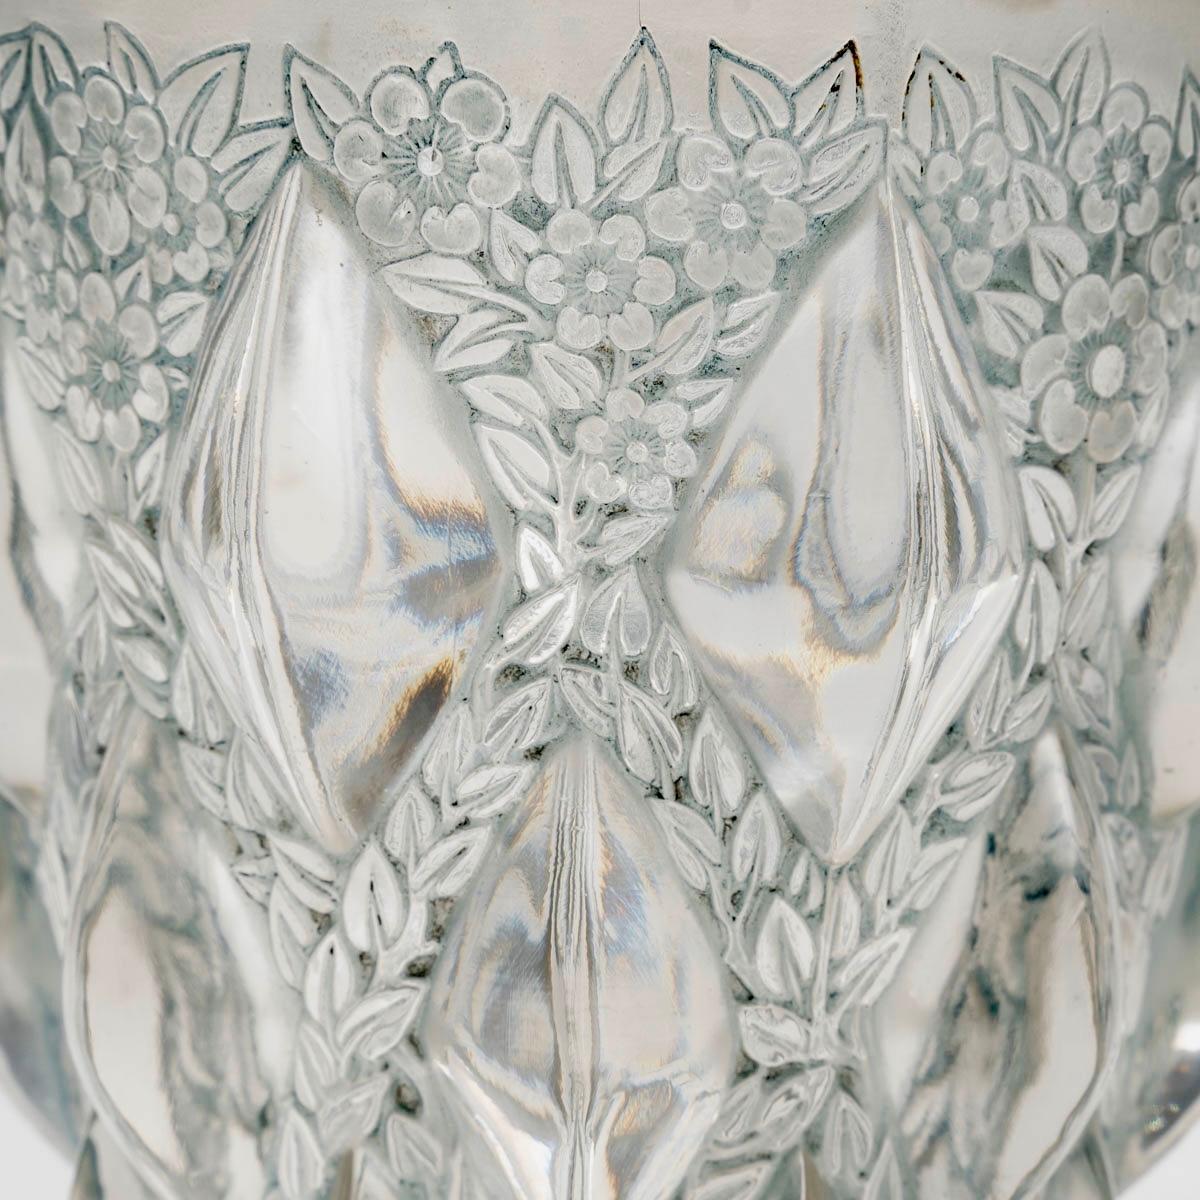 Molded 1927 René Lalique Vase Rampillon Frosted Glass with Blue-Grey Patina For Sale